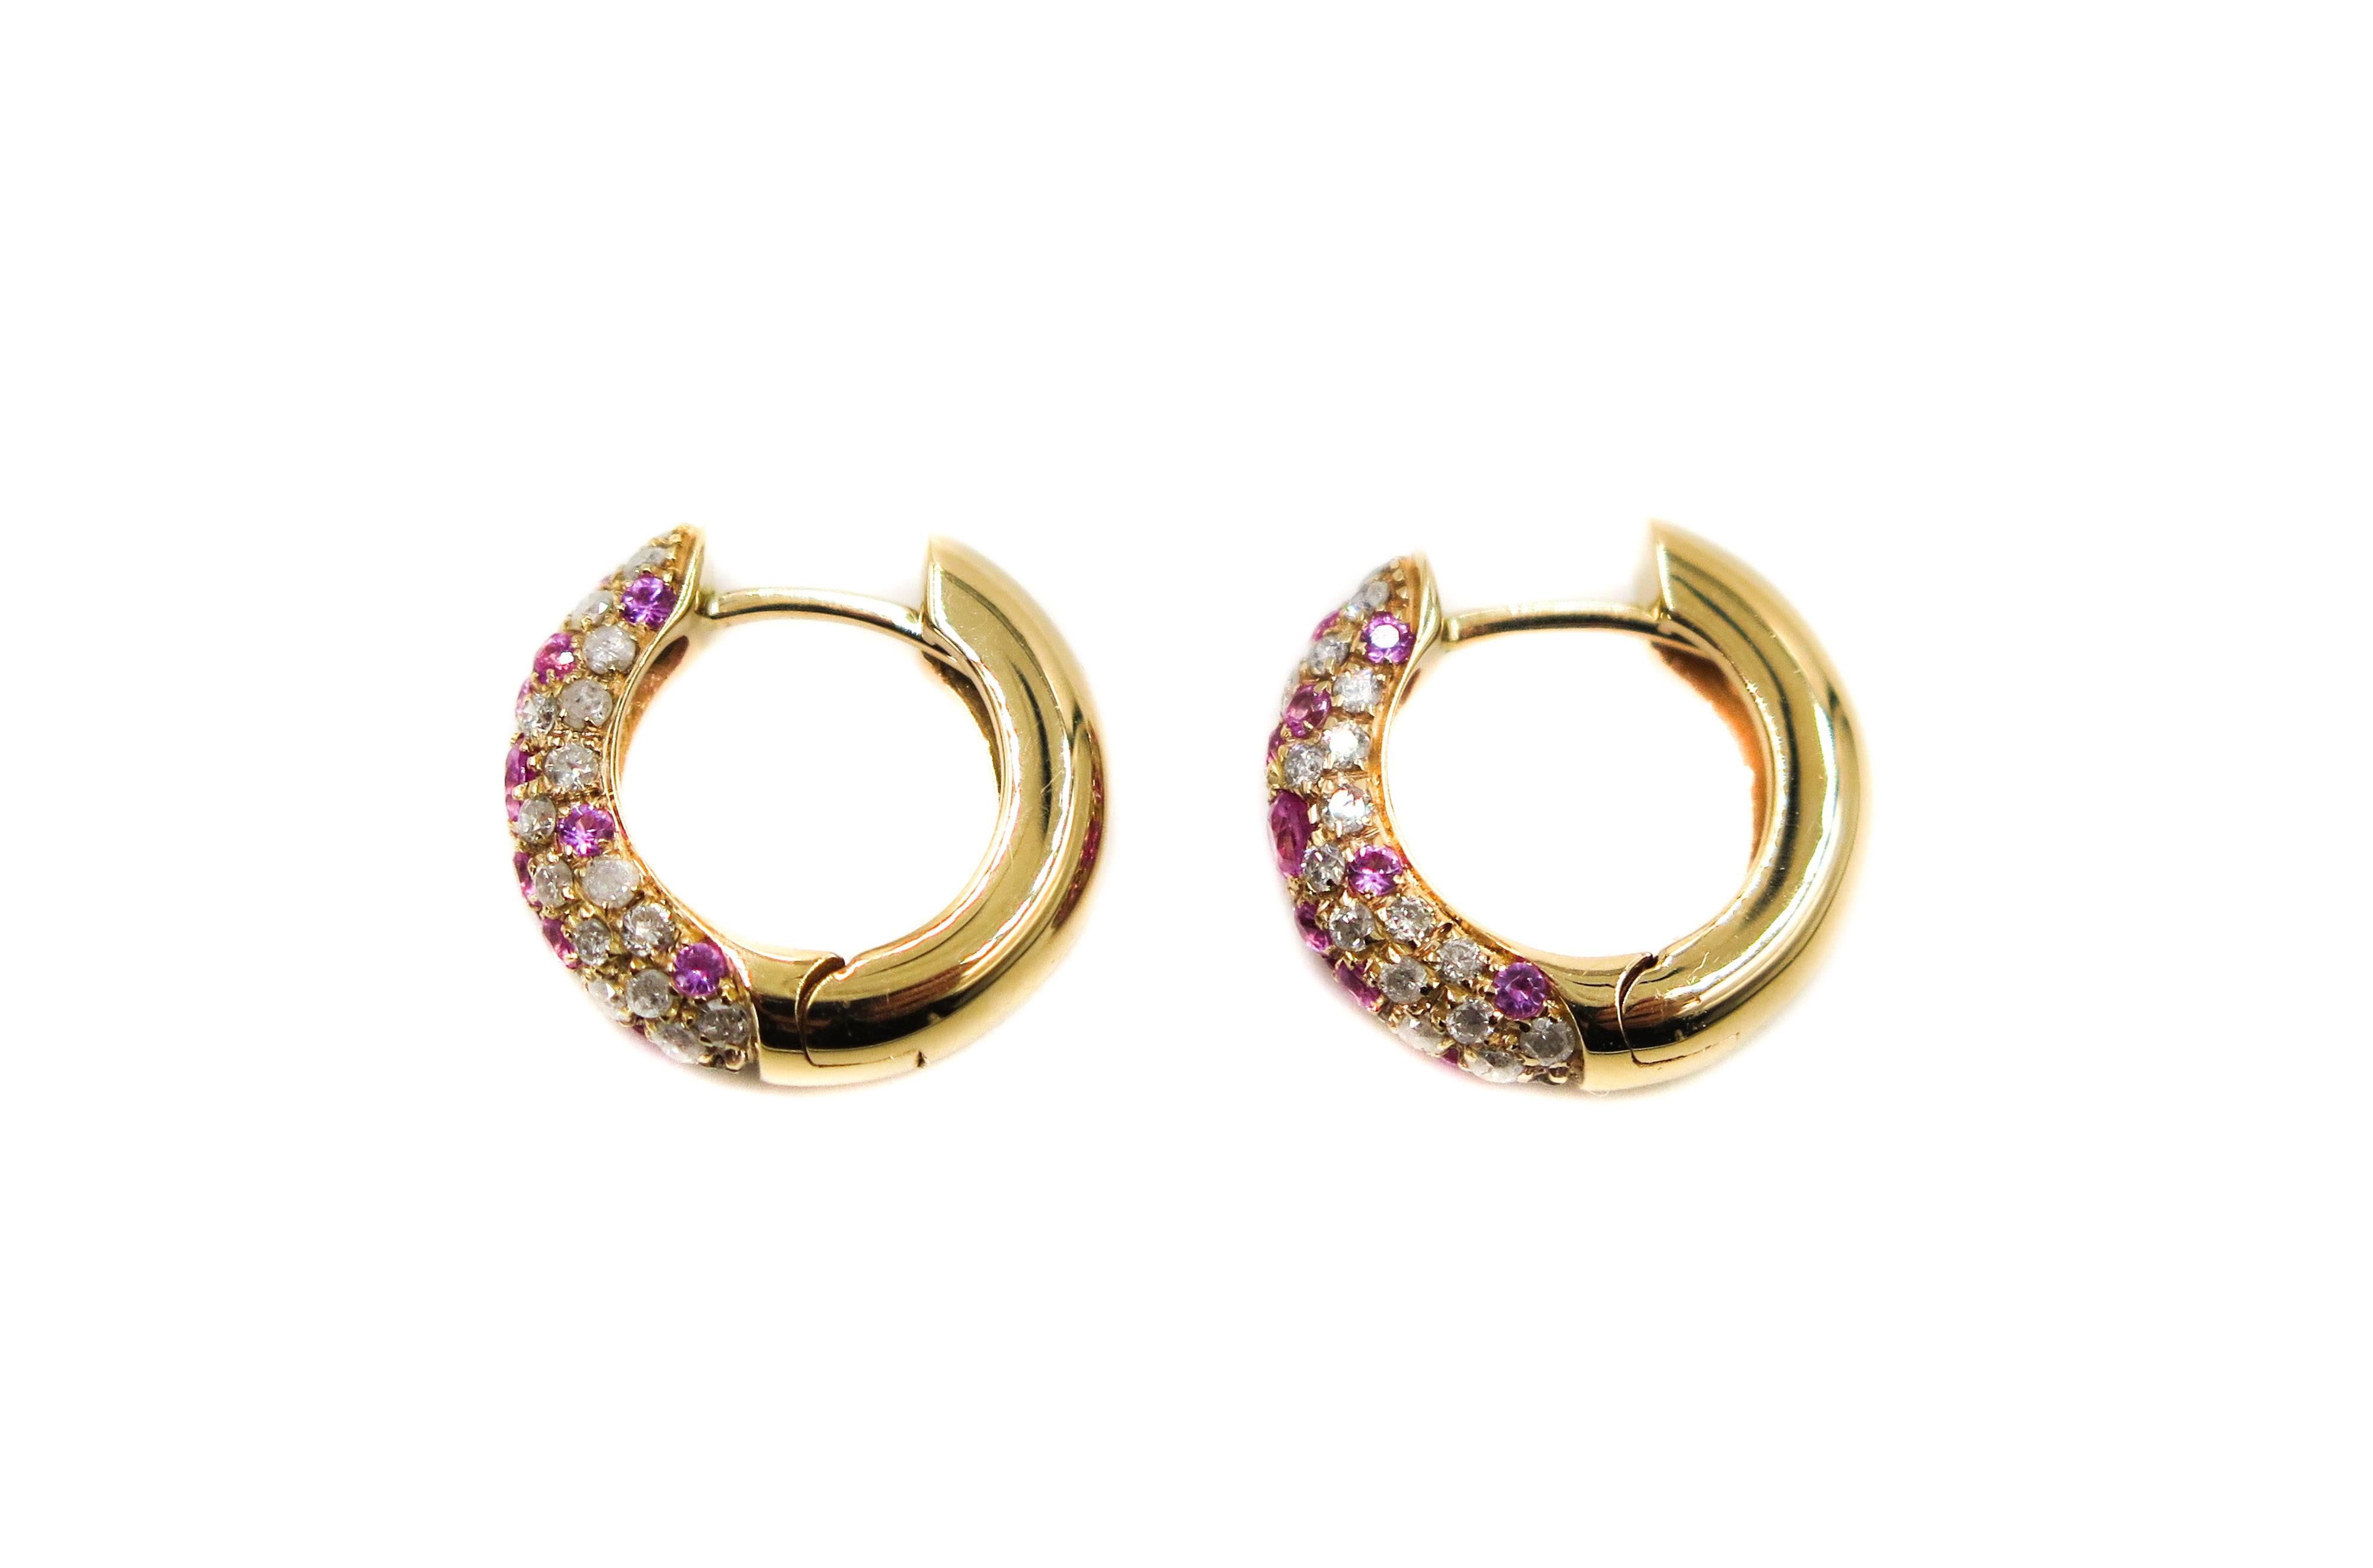 To the fashion connoisseur, having a beautifully handmade piece of jewelry by an Italian designer is owning a very special piece of jewelry.
This pair of huggies showcases the workmanship being featured in a fine pave work.  This confetti of colors